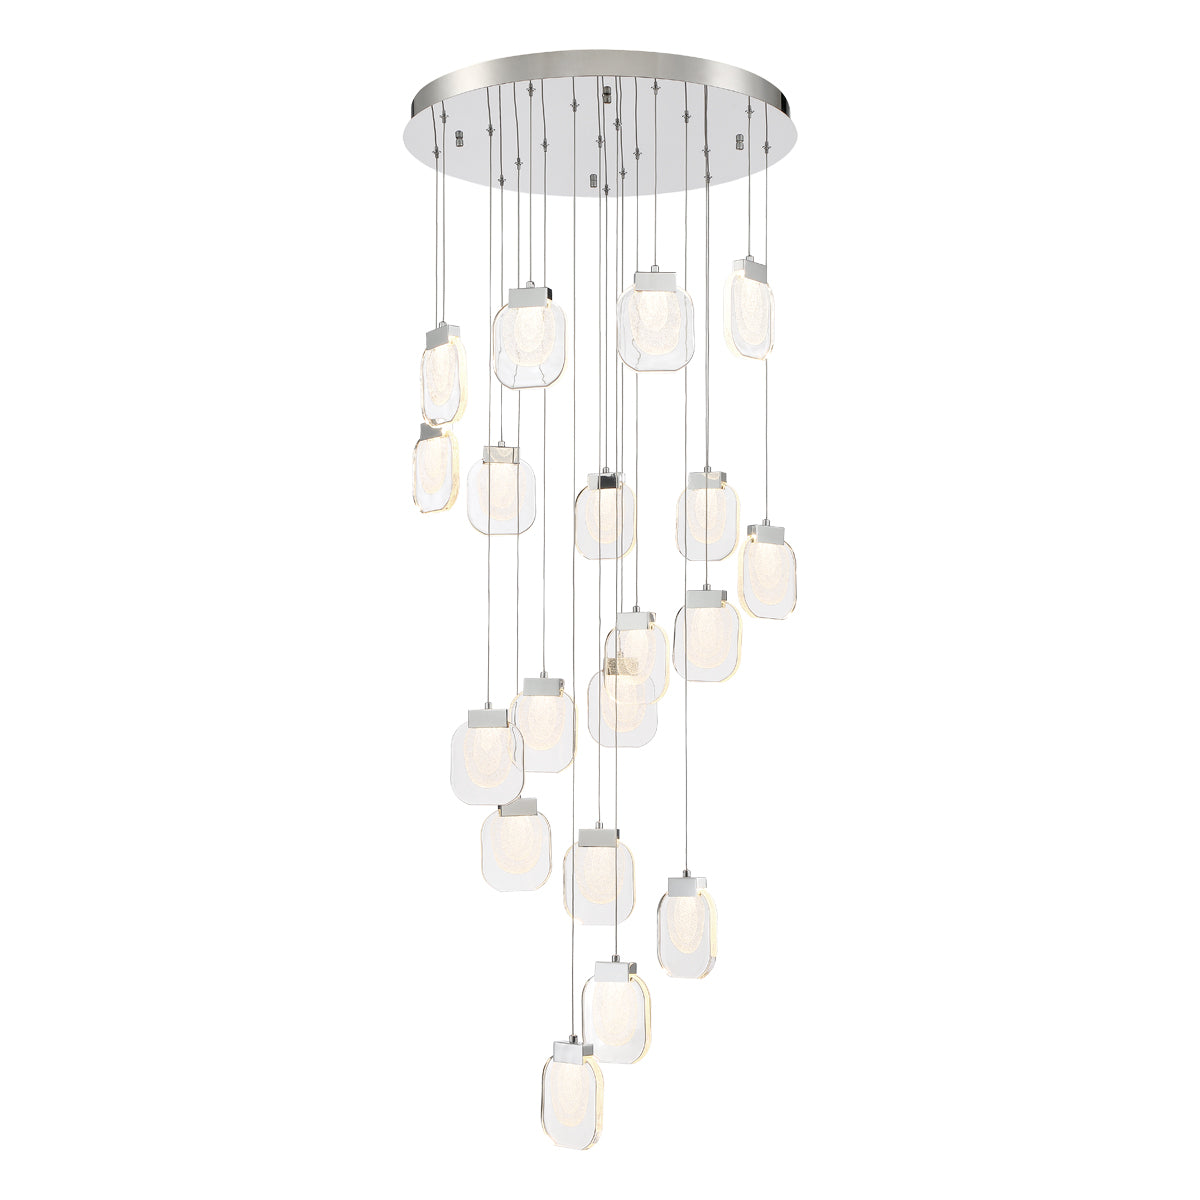 PAGET Chandelier Chrome - 37192-023 | EUROFASE